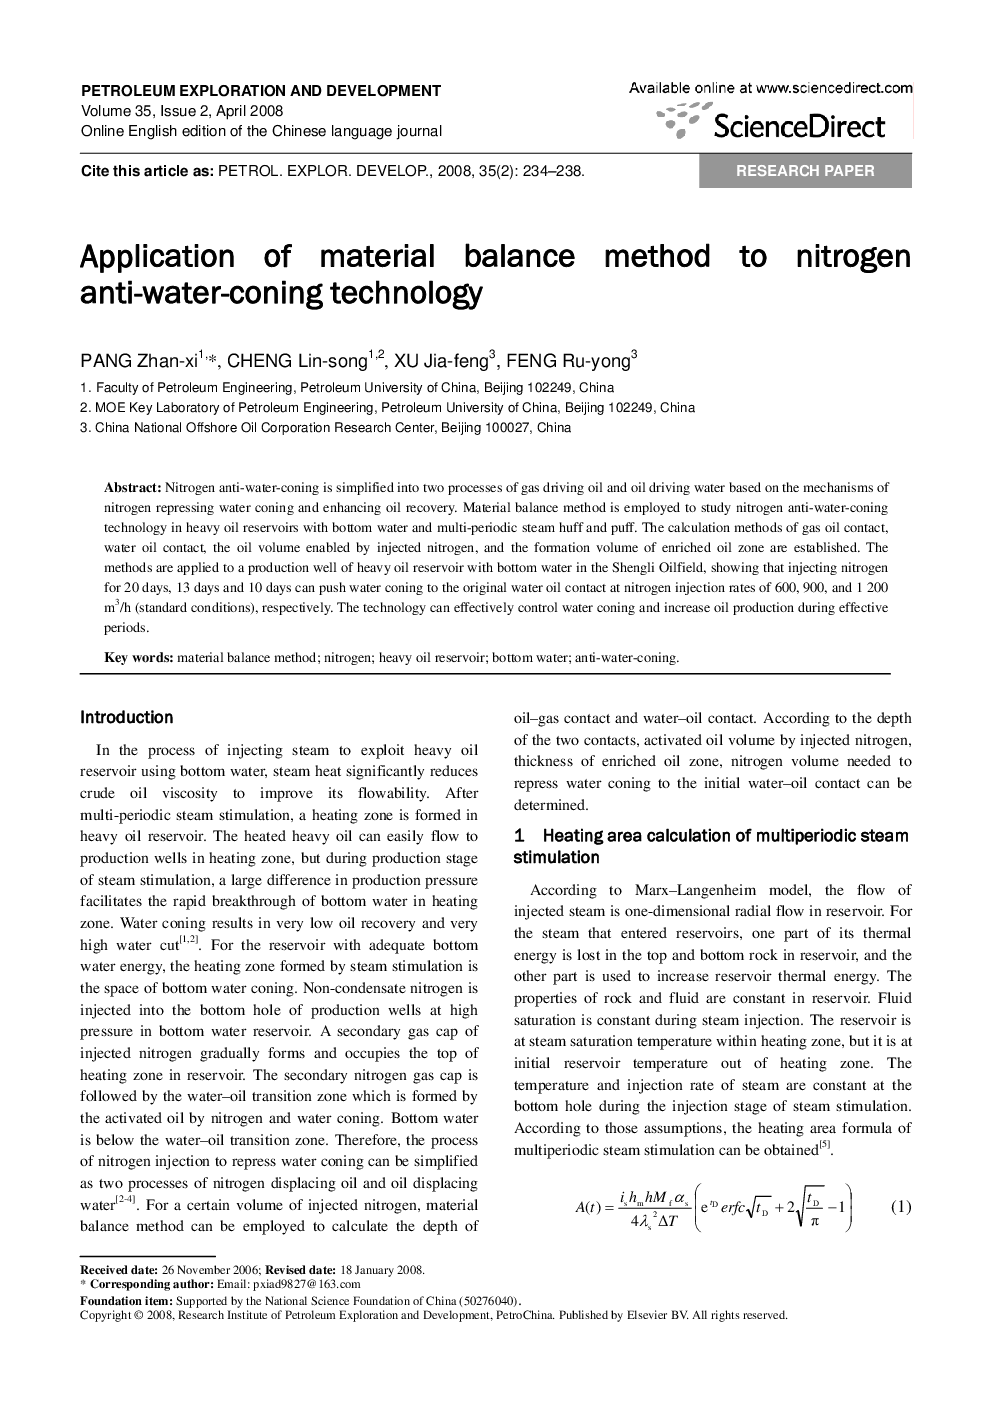 Application of material balance method to nitrogen anti-water-coning technology 